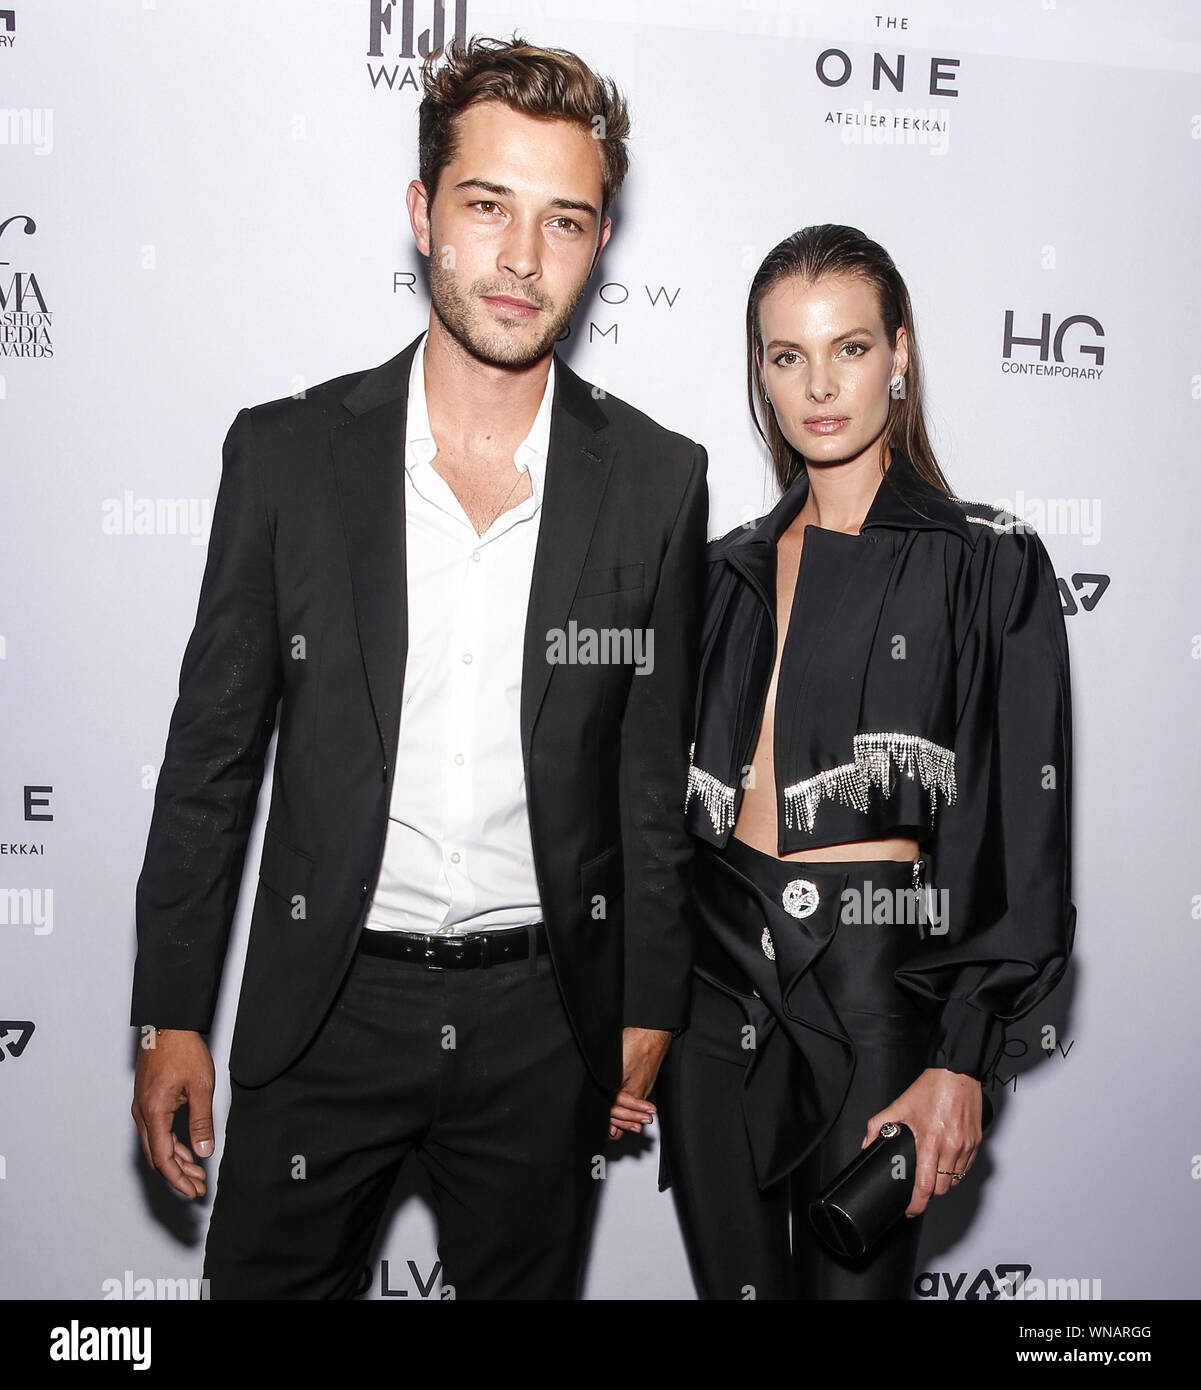 new-york-ny-september-05-2019-francisco-lachowski-and-jessiann-gravel-beland-attend-the-daily-front-rows-7th-annual-fashion-media-awards-at-the-WNARGG.jpg